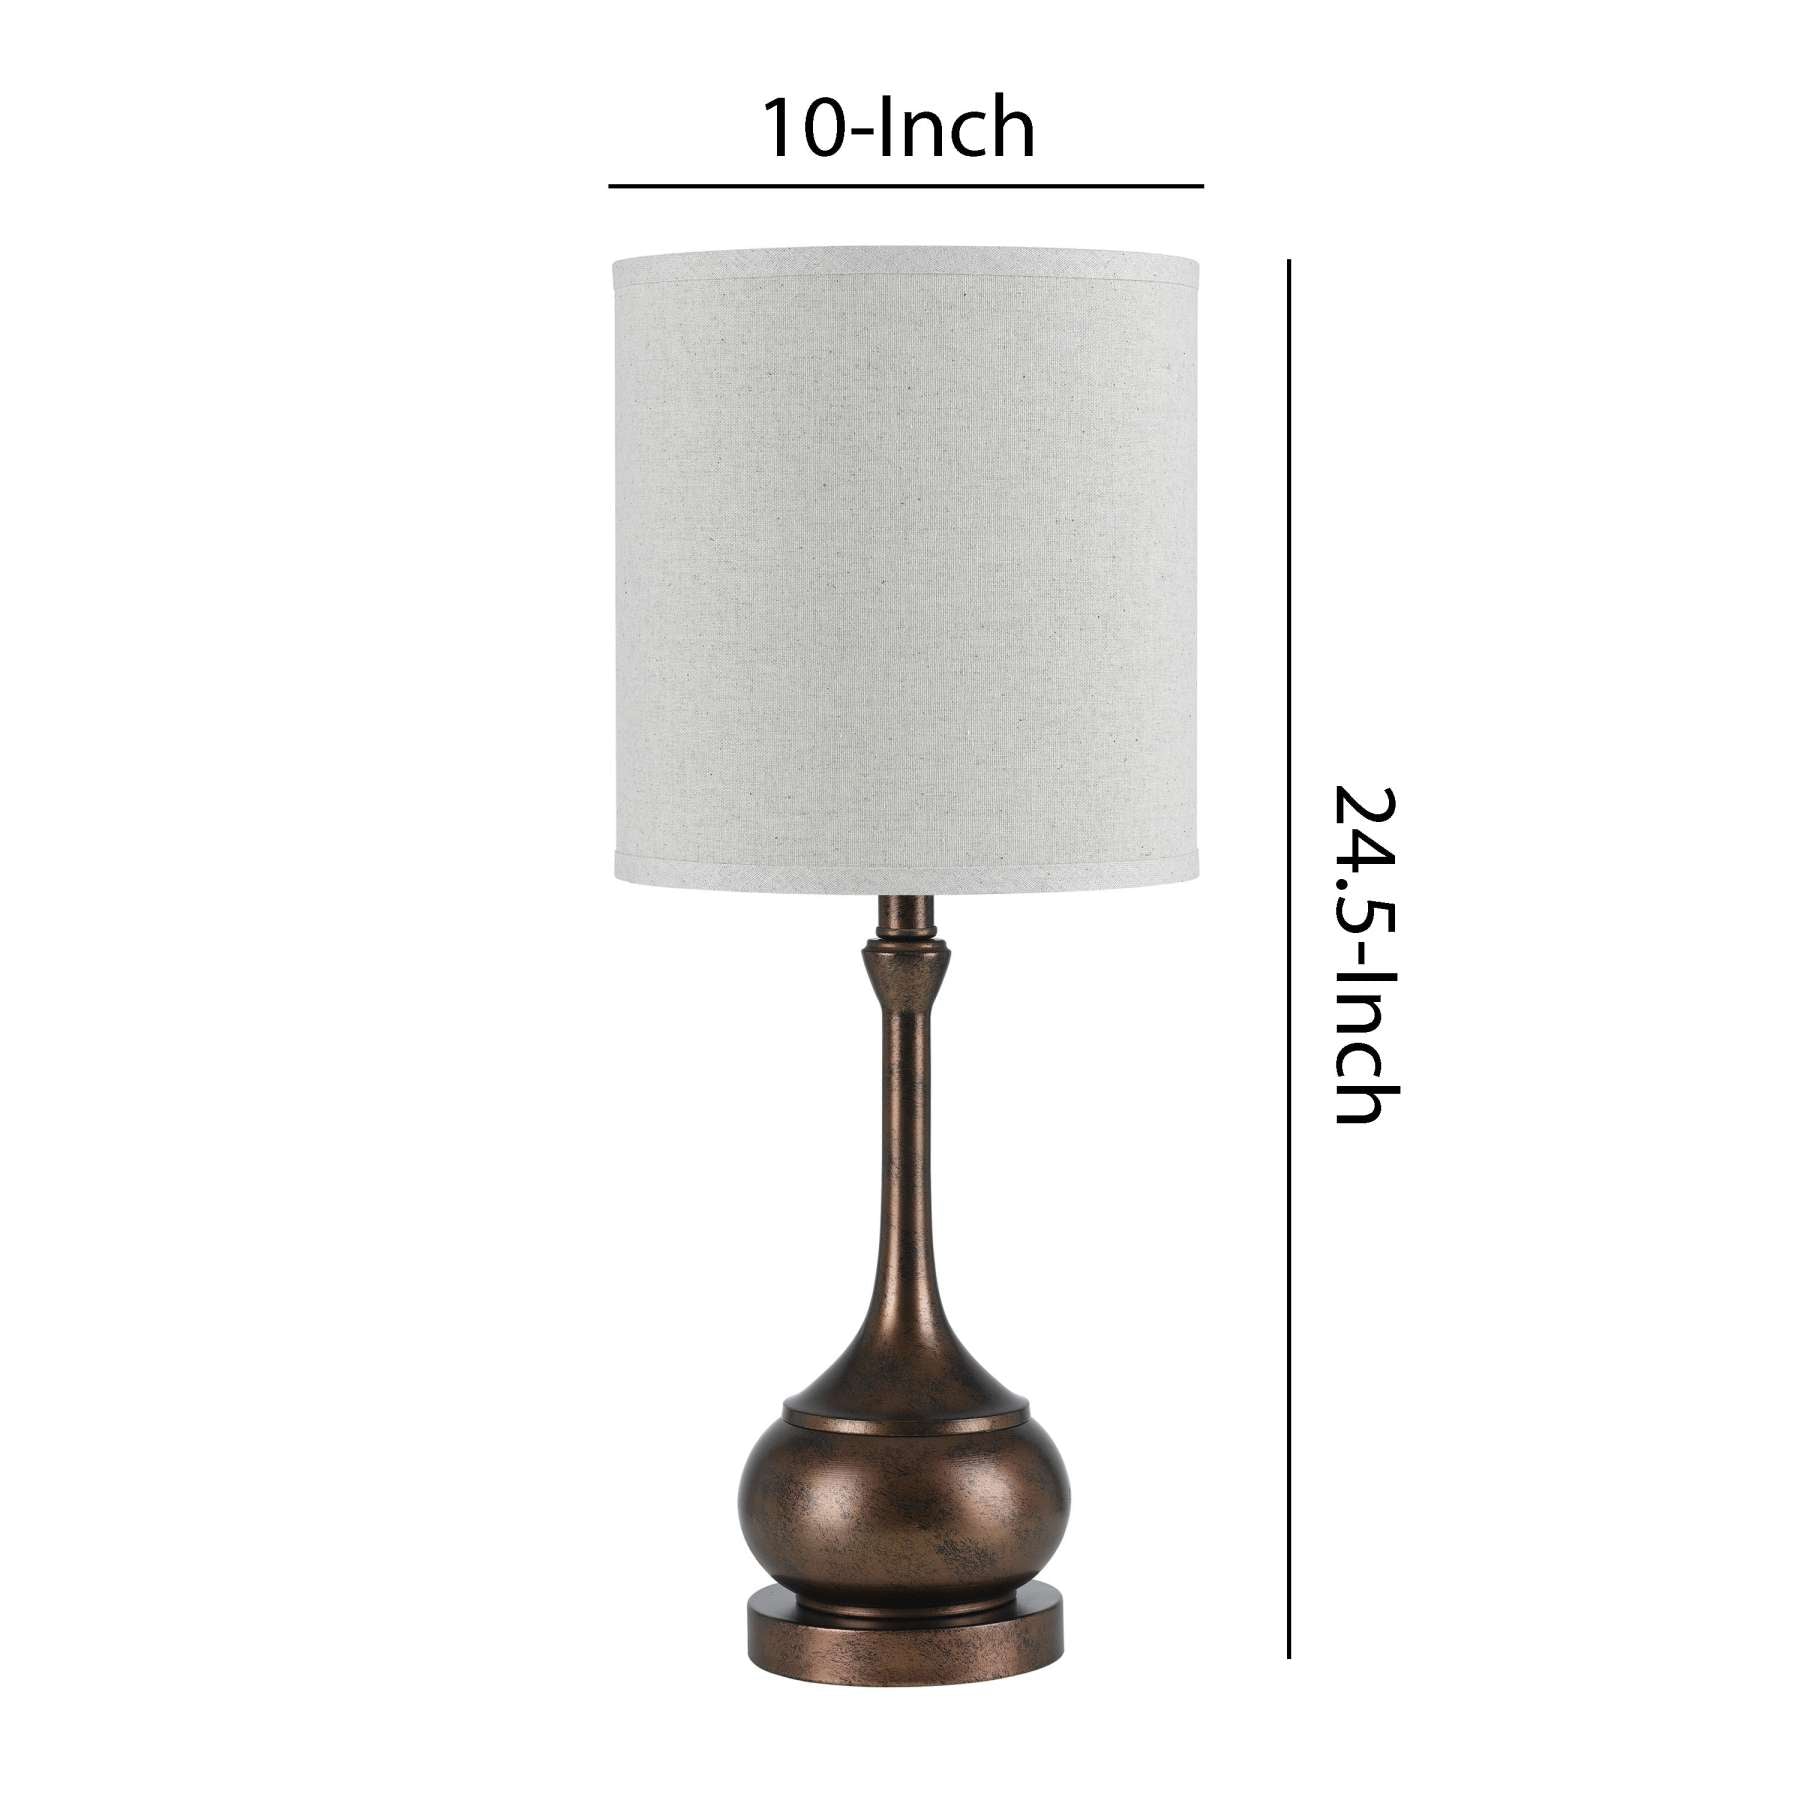 Elongated Bellied Shape Metal Accent Lamp With Drum Shade, Rustic Bronze By Benzara